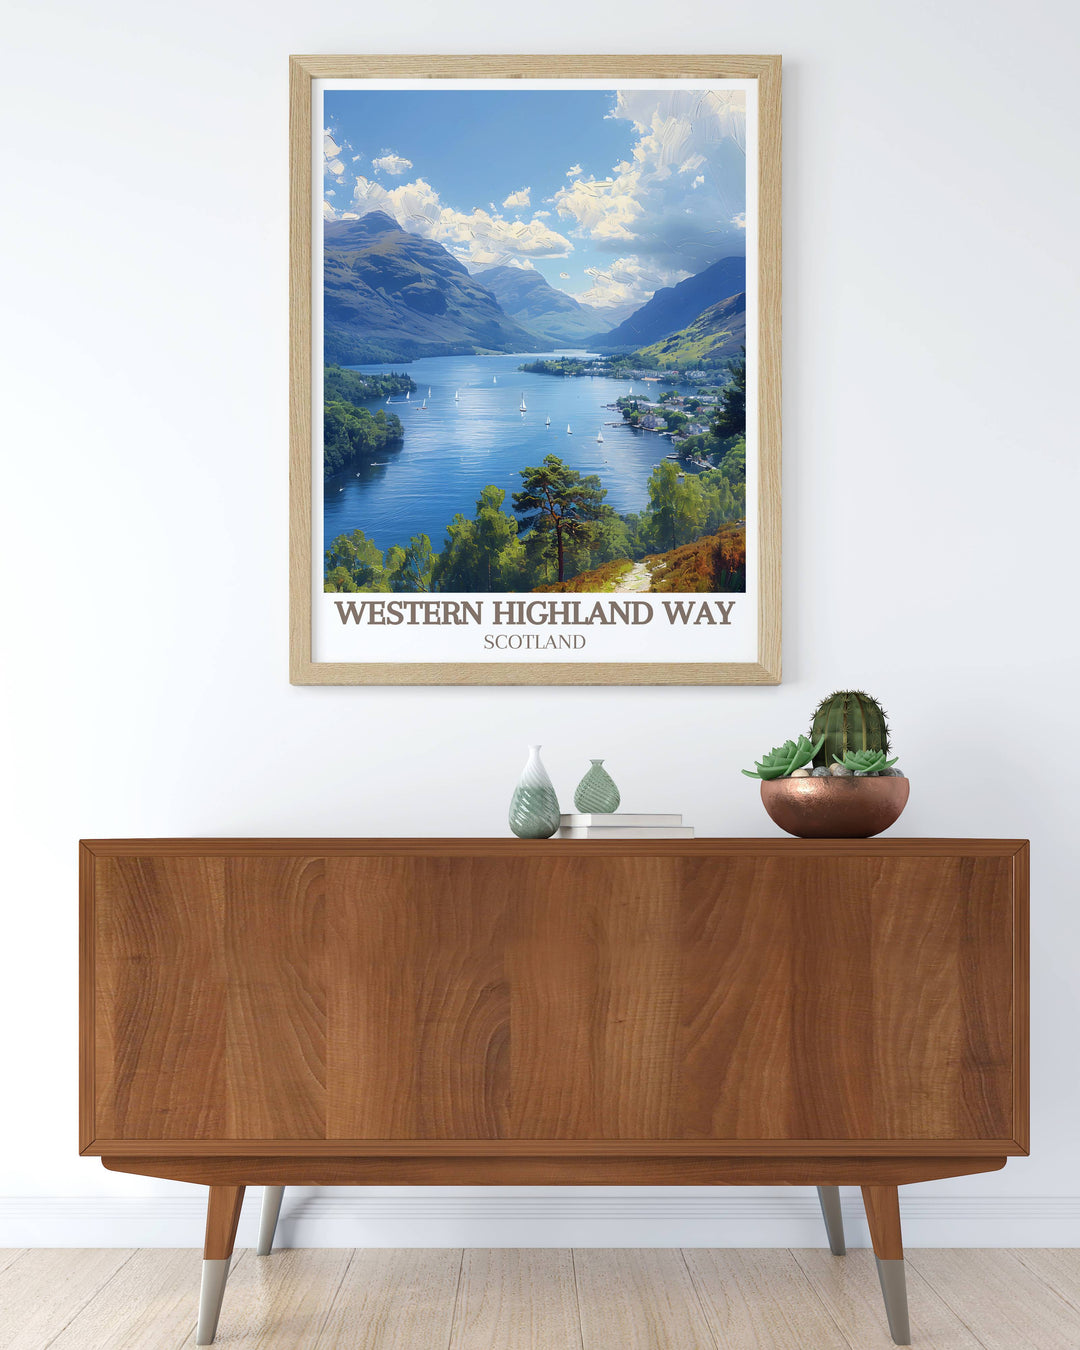 Modern wall decor of the West Highland Way featuring Loch Lomond, highlighting the picturesque scenery of Scotlands famous loch.